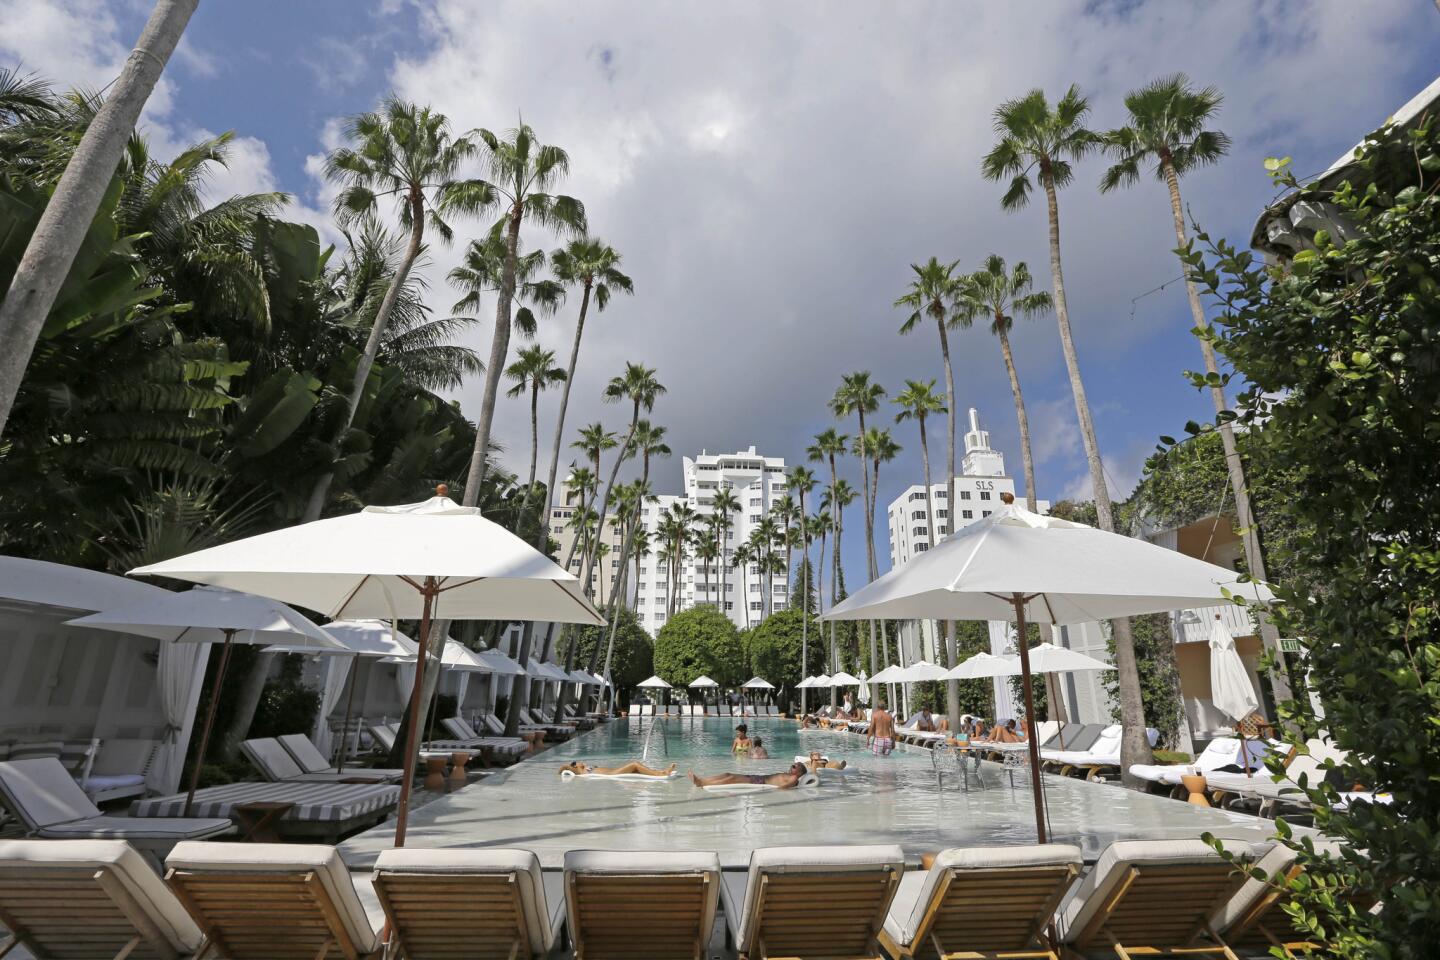 This photo taken Friday, Oct. 9, 2015, shows the pool of the Hotel Delano South Beach in Miami Beach, Fla. The design ideals and social experience offered at the Delano have almost become industry standards, as major hotel chains have launched new “boutique” brands aimed at millennials and design-savvy travelers. (AP Photo/Alan Diaz) ORG XMIT: FLAD214